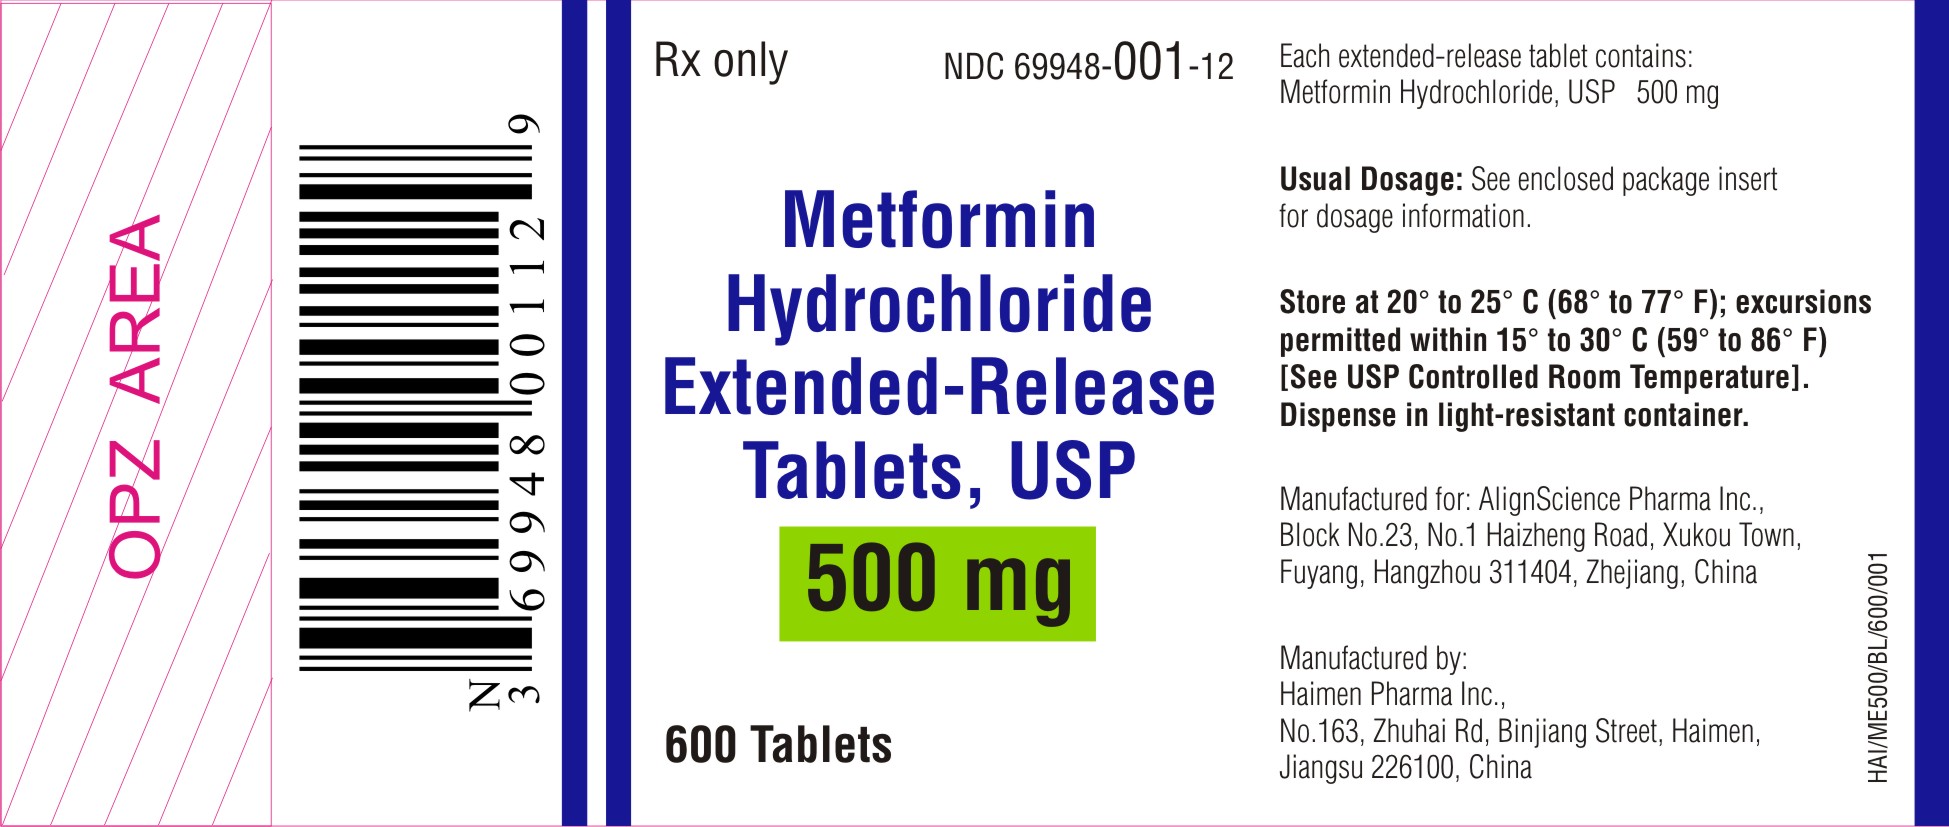 METFORMIN HYDROCHLORIDE EXTENDED-RELEASE TABLETS - 500 mg